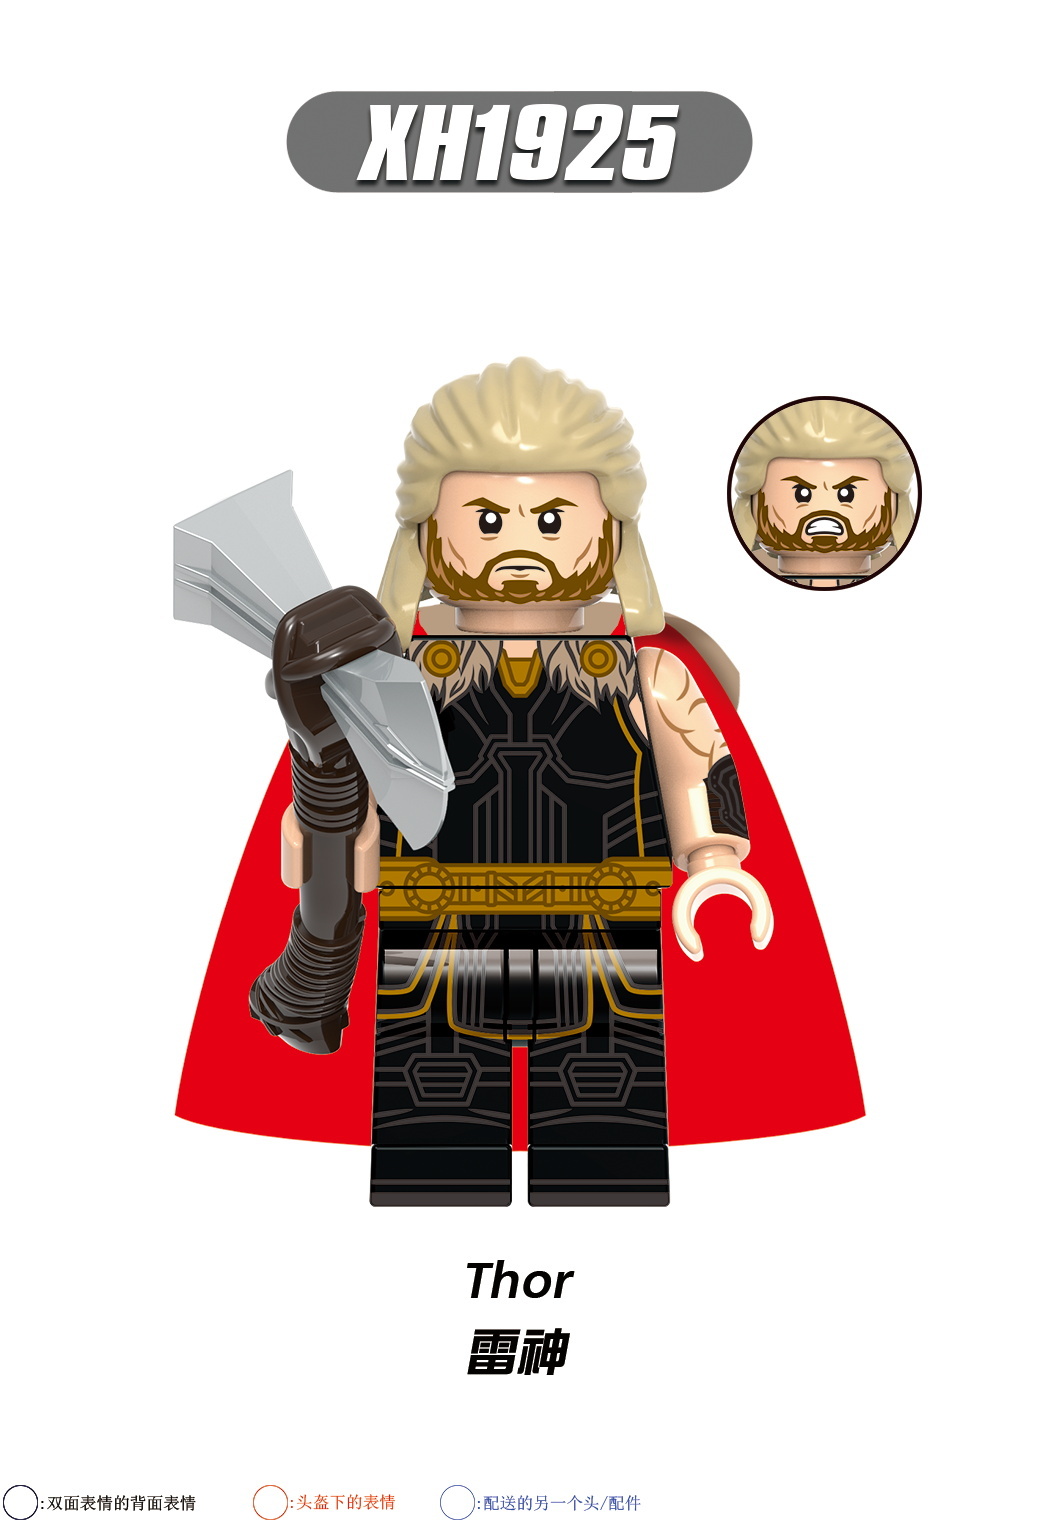 X0339 XH1923 XH1924 XH1925 XH1926 XH1927 XH1928 XH1929 XH1930 Super Hero Movie Series Building Blocks Thor Korg Mighty Thor Gorr Star-Lord Valkyrie Ravager Thor Action Figures Educational Toys For Kids Gifts